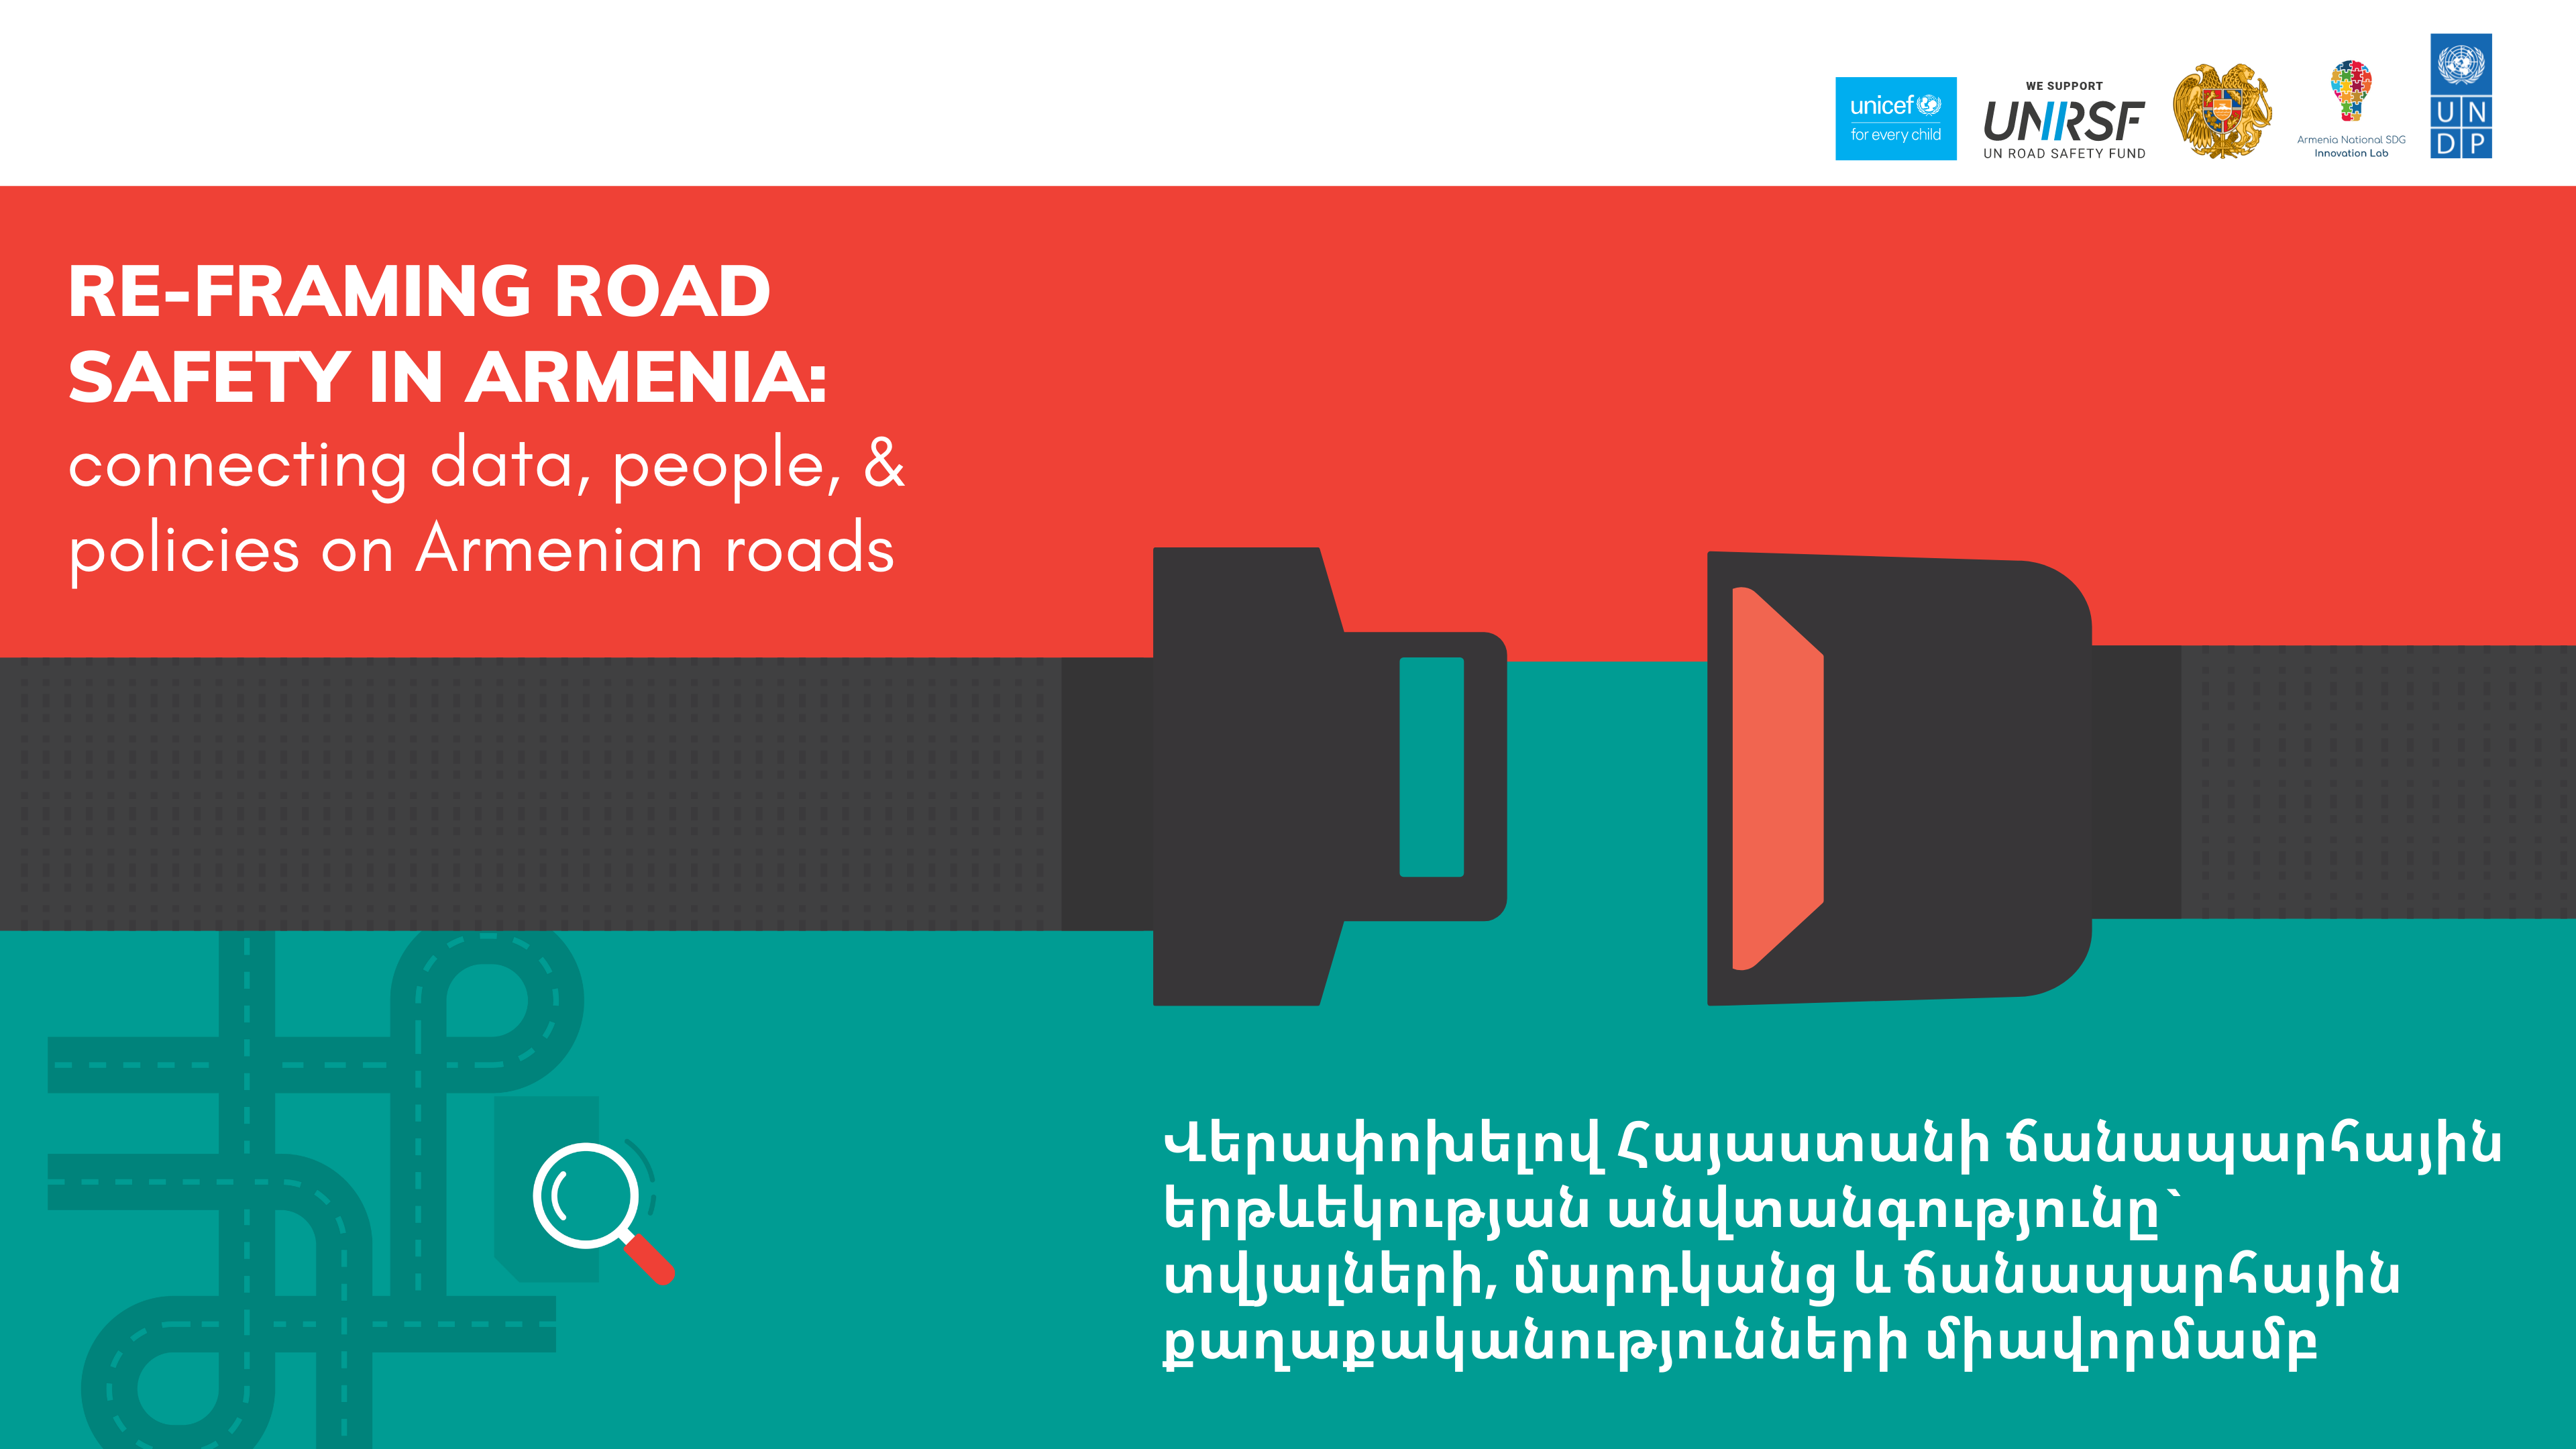 Re-framing road safety in Armenia: Connecting data, people, and policies for safer roads